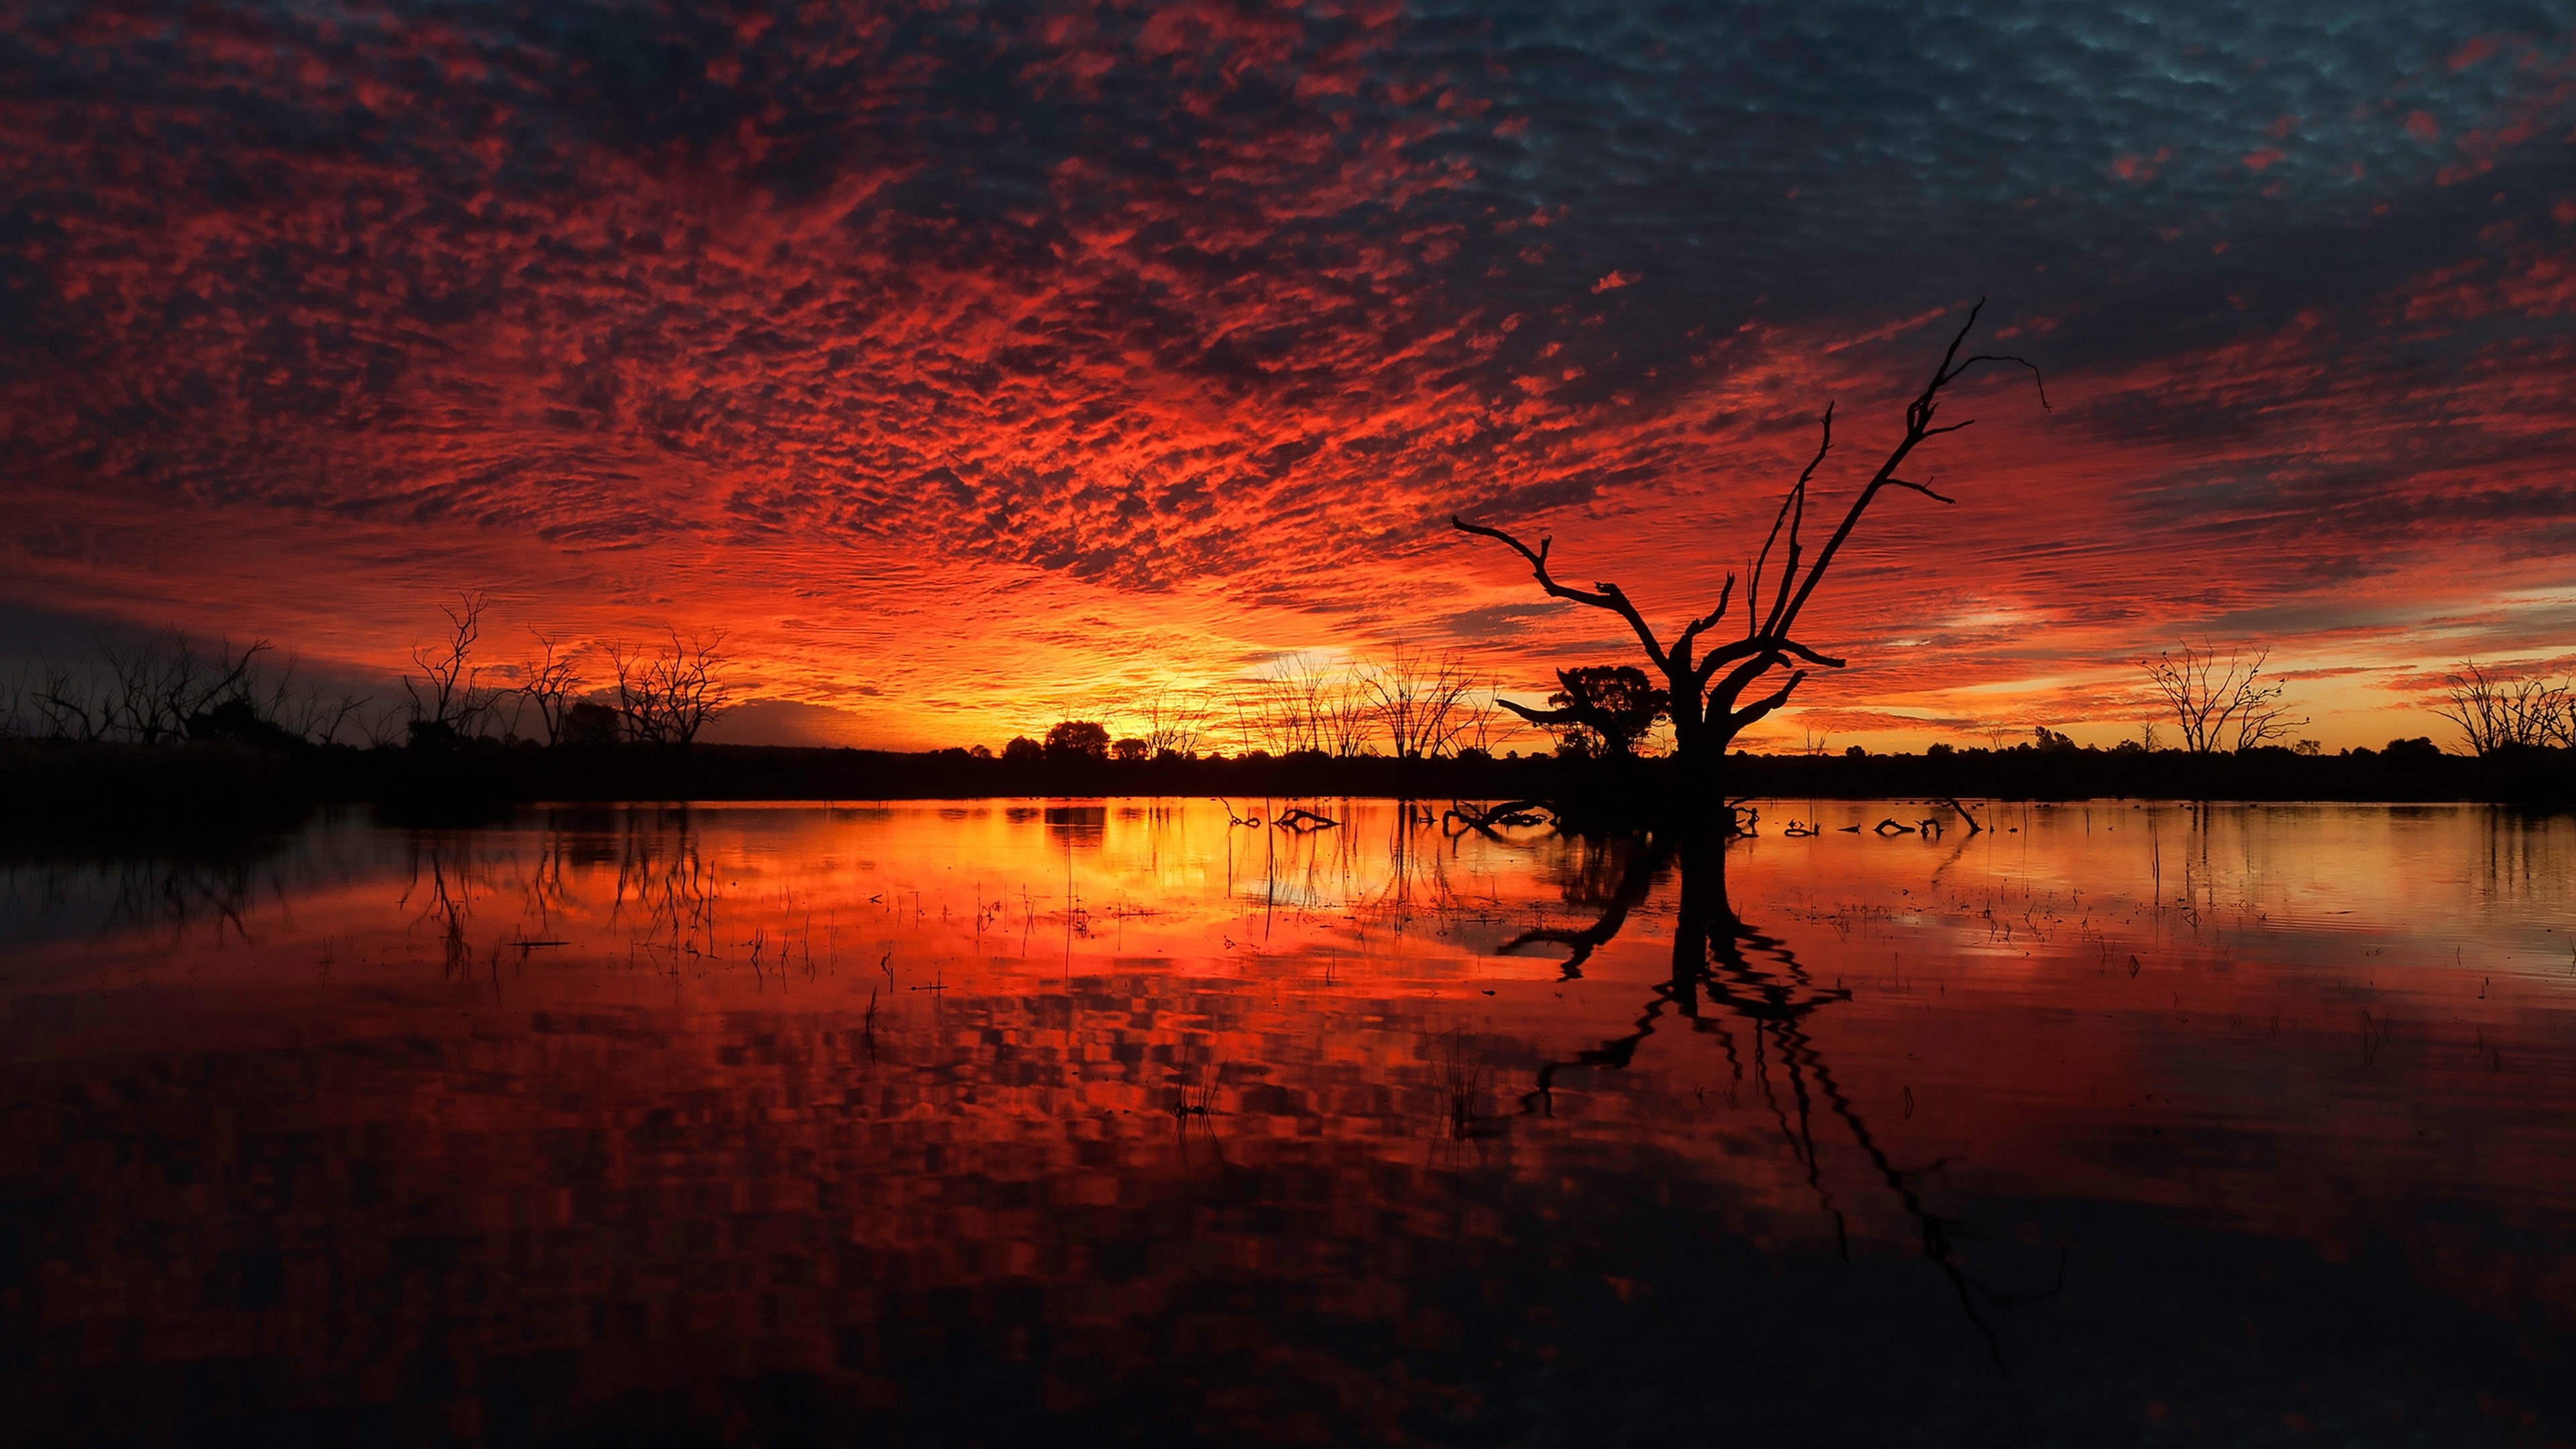 General 3840x2160 landscape clouds lake skyscape sunset silhouette red dead trees orange sky reflection nature sunlight sky